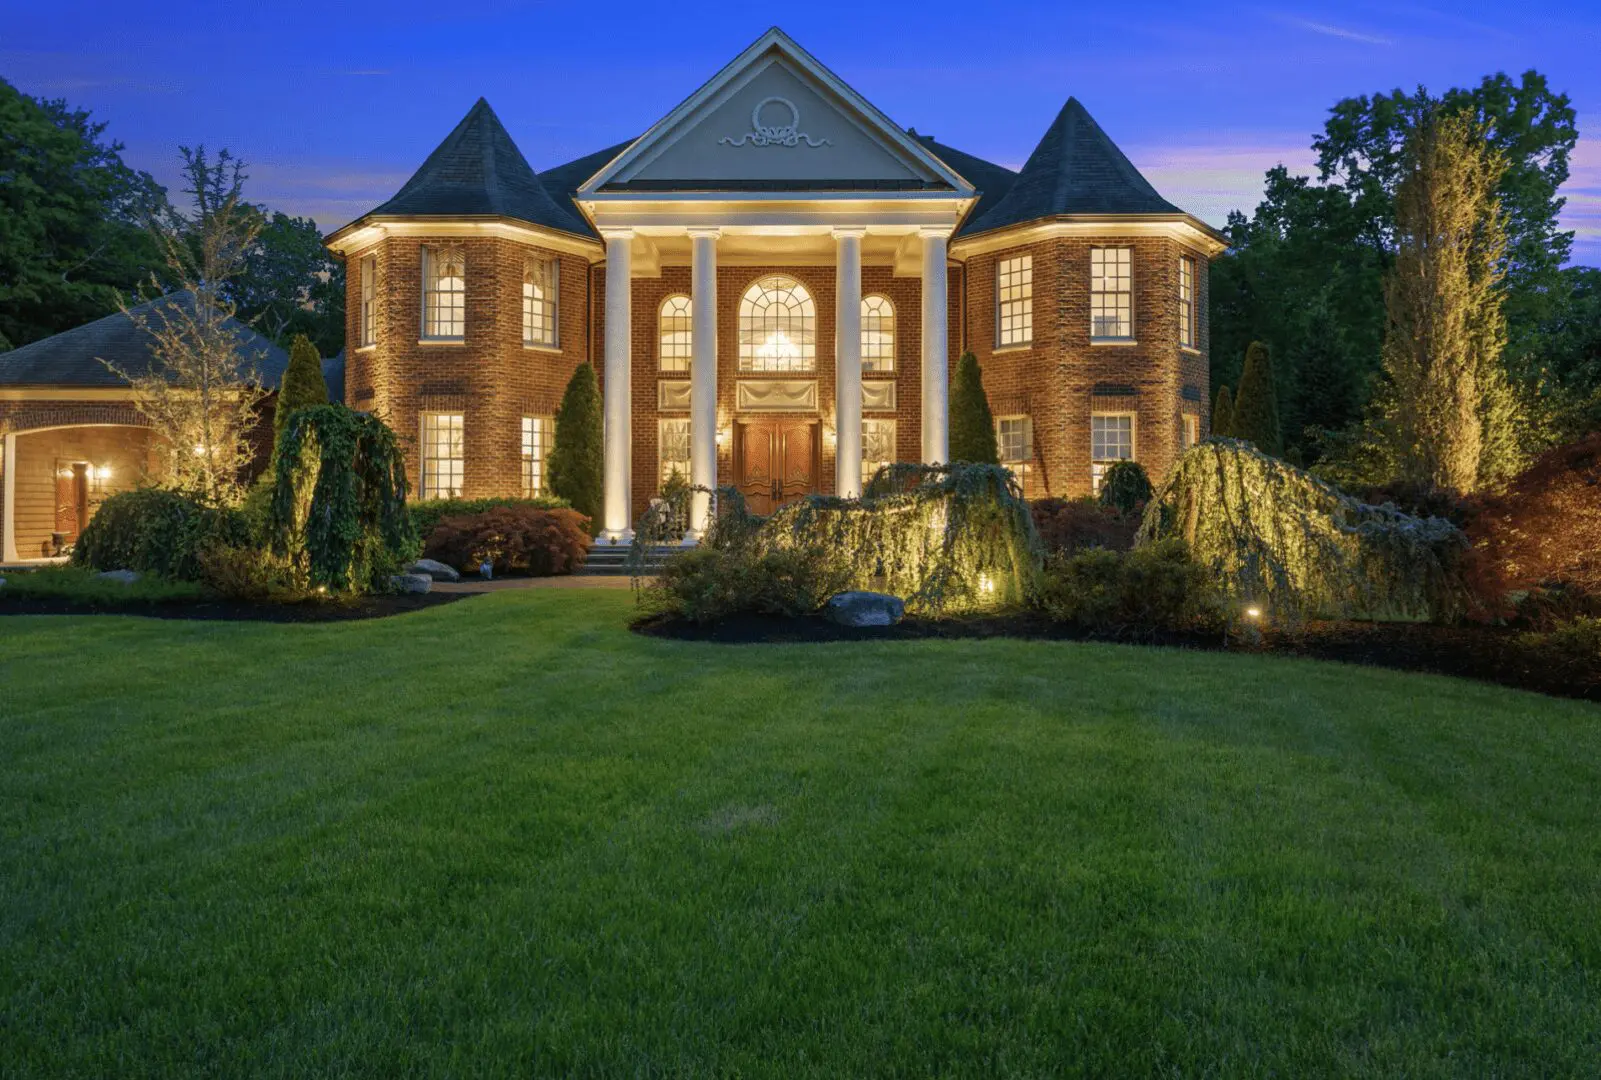 Homes for sale near me, A large brick home at dusk with a large lawn.